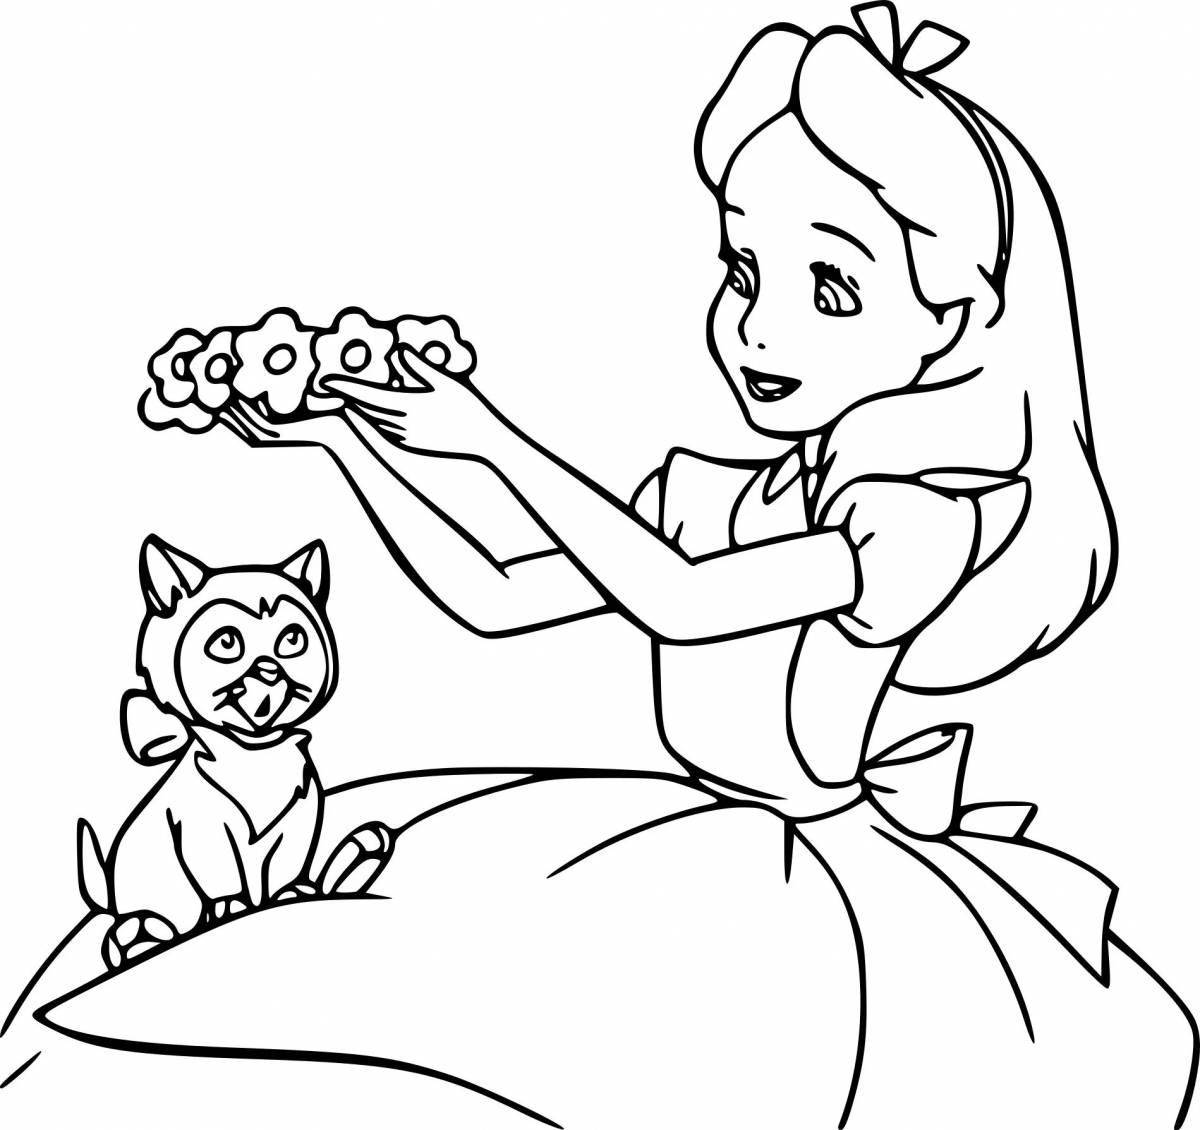 Bright Alice coloring for girls